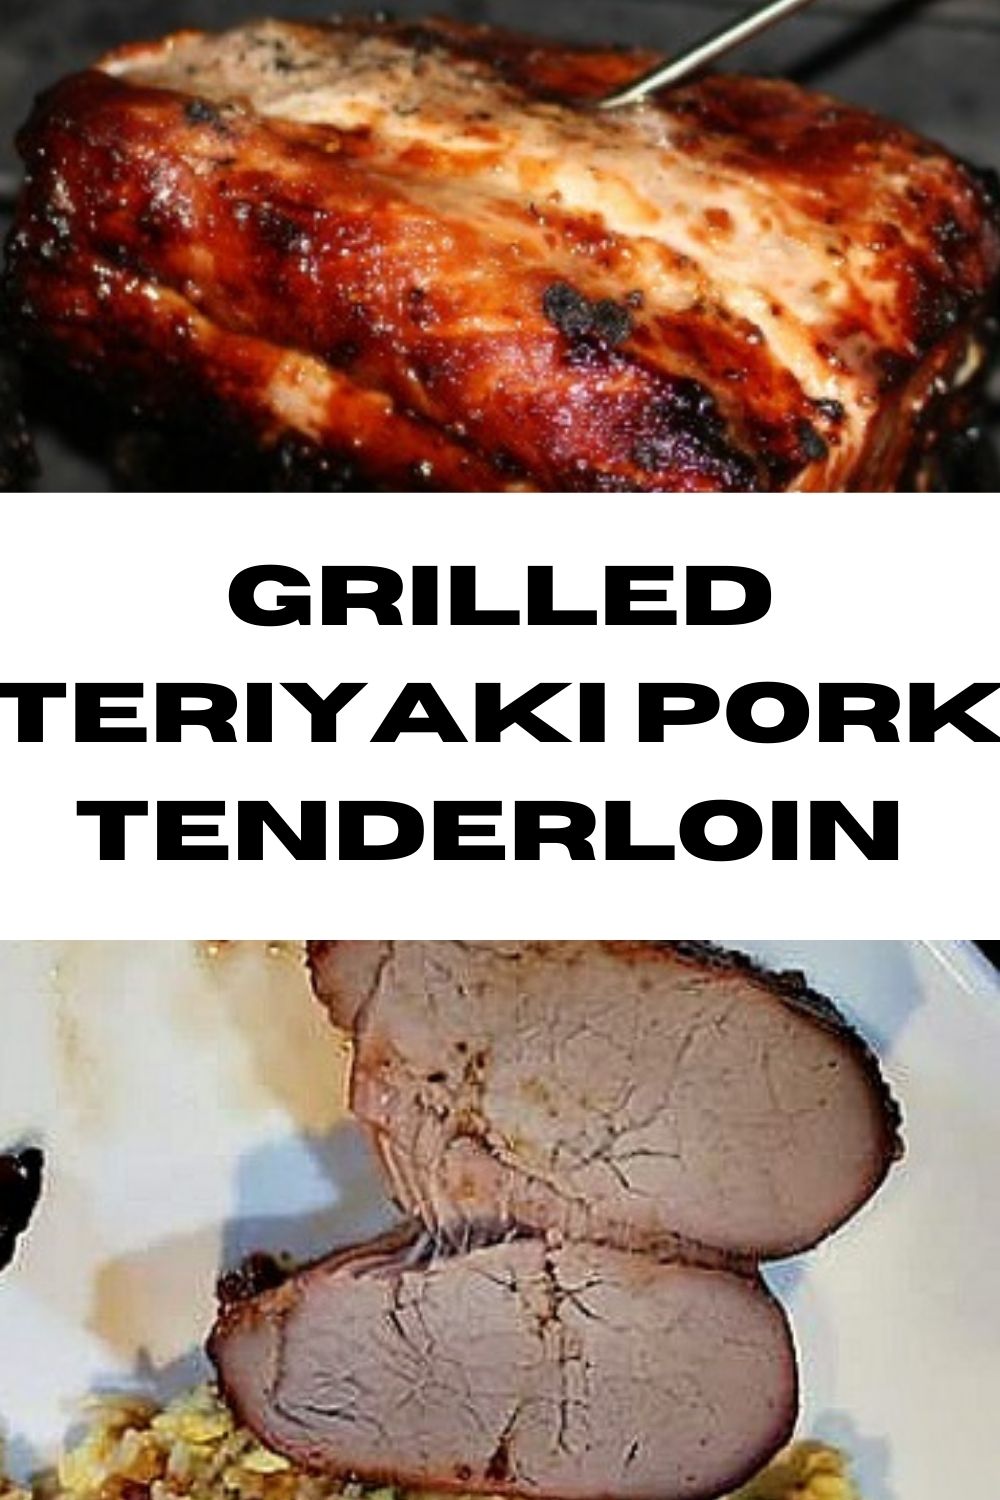 This Grilled Teriyaki Pork Tenderloin Recipe is perfect to make for dinner at home! The easy marinade adds great flavor, and pairs great with fried rice to.